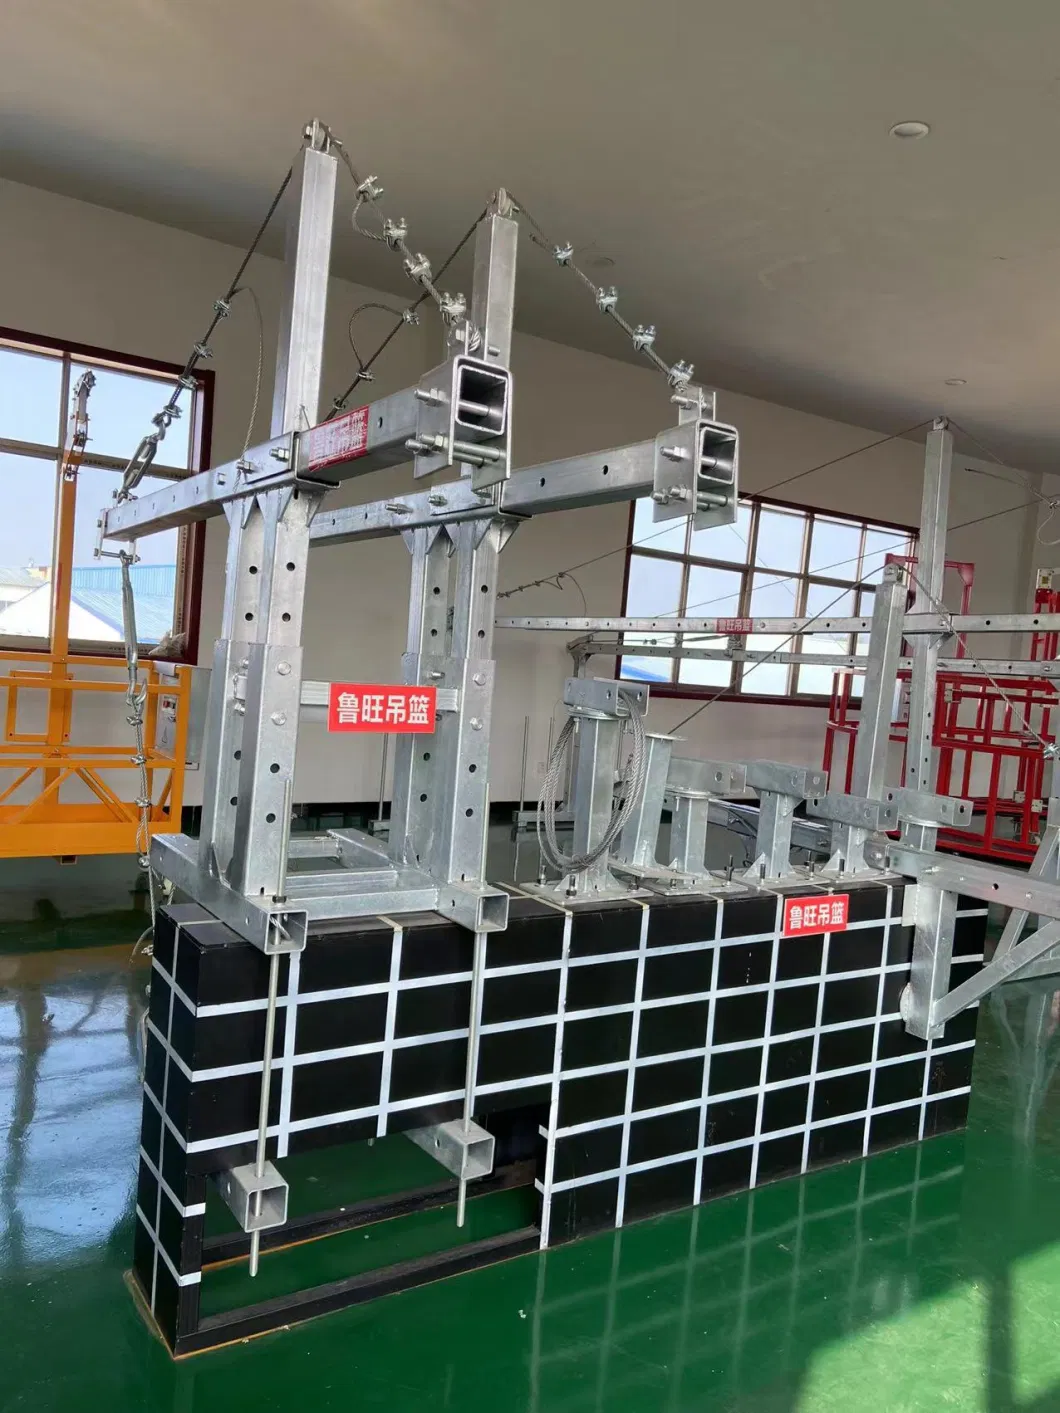 Zlp800 Aluminum Electric Gondola Scaffolding Suspended Platform Frame Construction Balconies Swing Stage Andamio Electrico